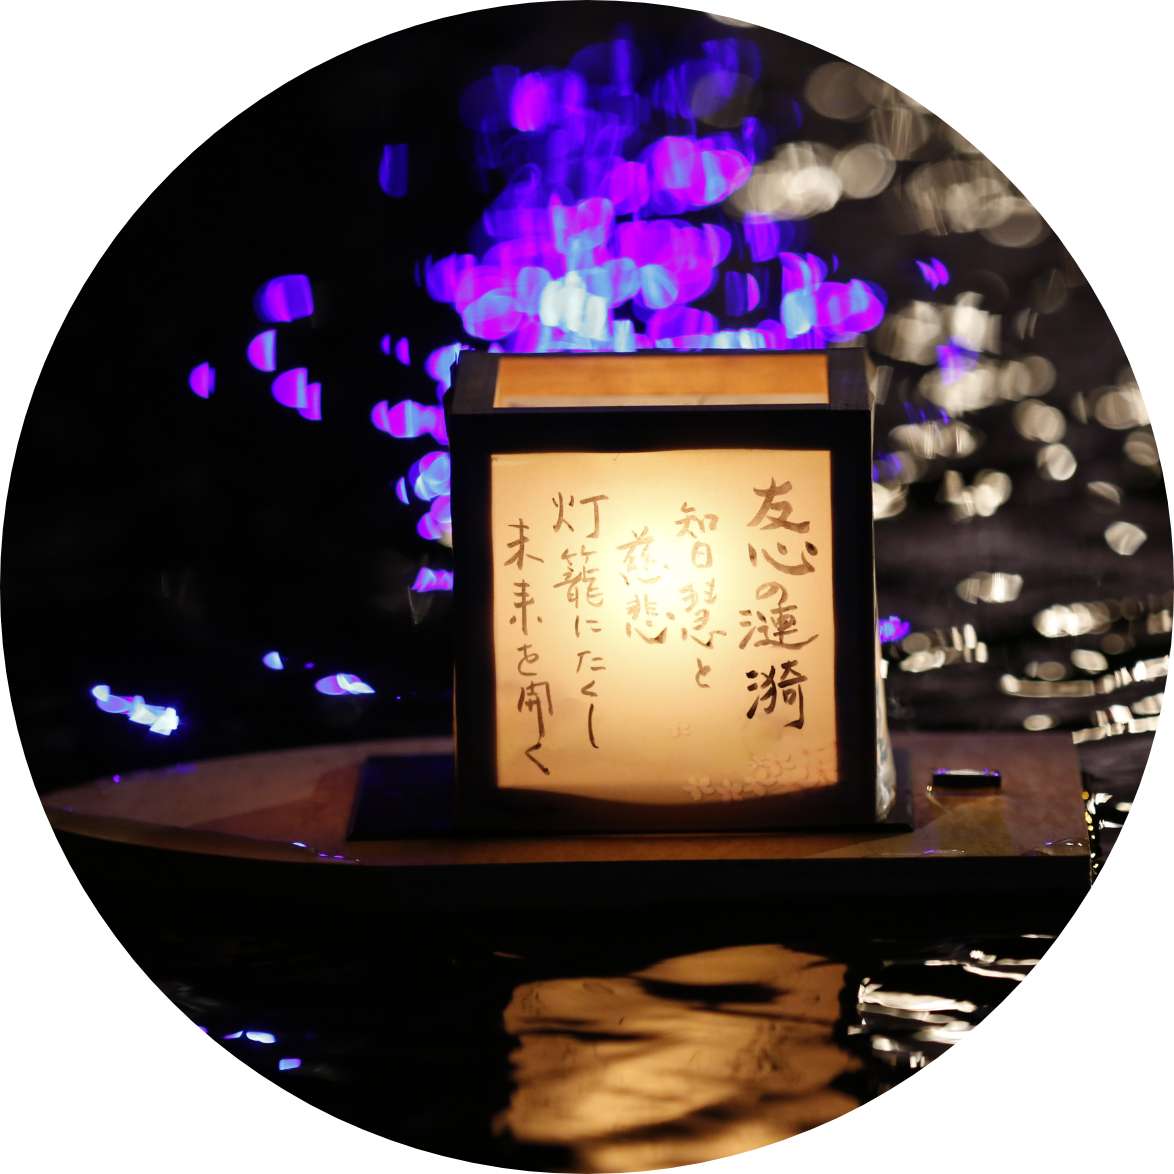 A glowing paper lantern decorated with messages in Japanese floats on water at night.